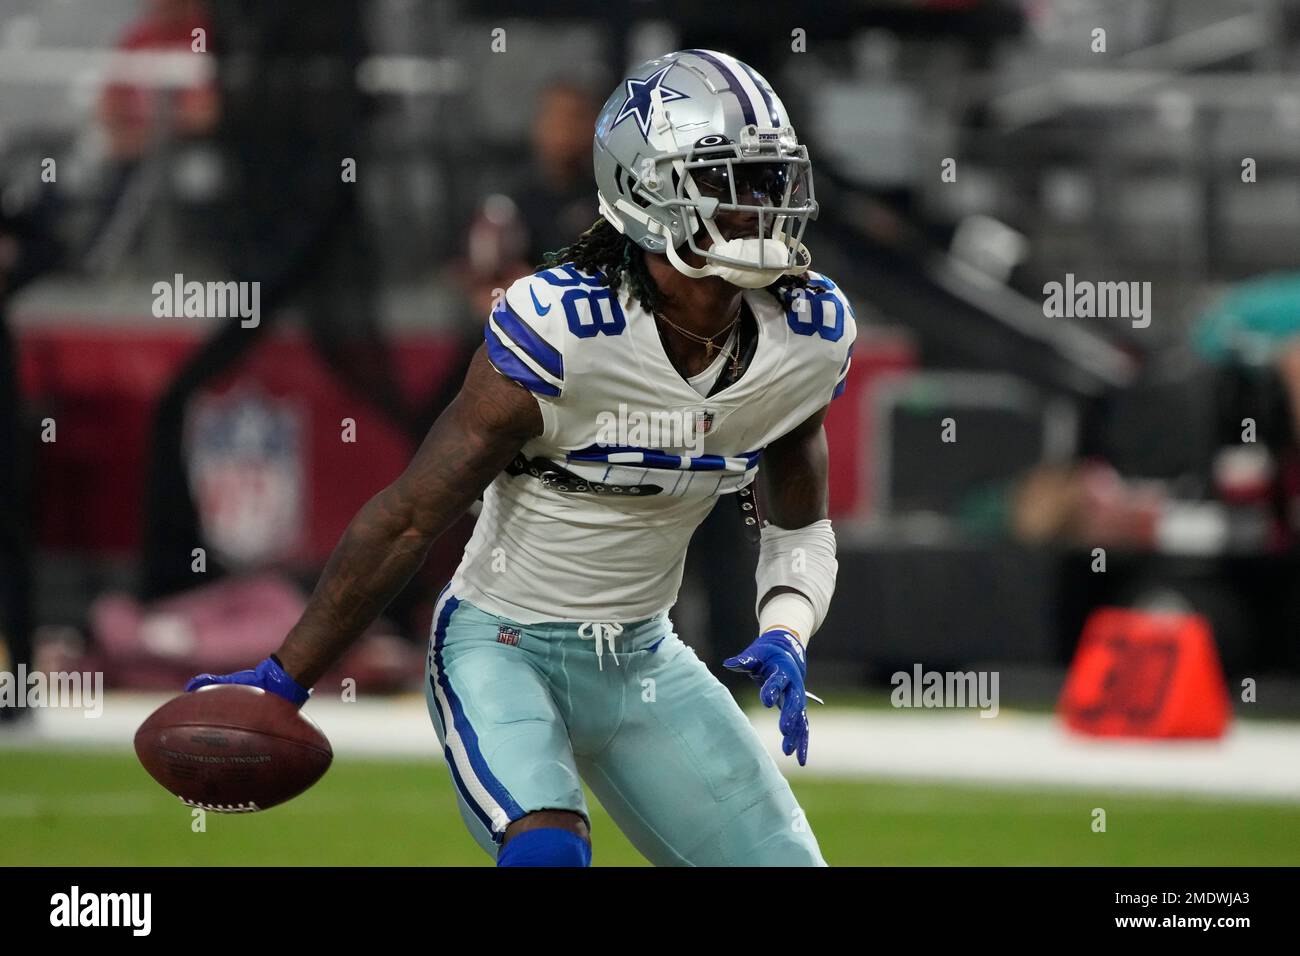 Dallas Cowboys wide receiver CeeDee Lamb (88) during the second